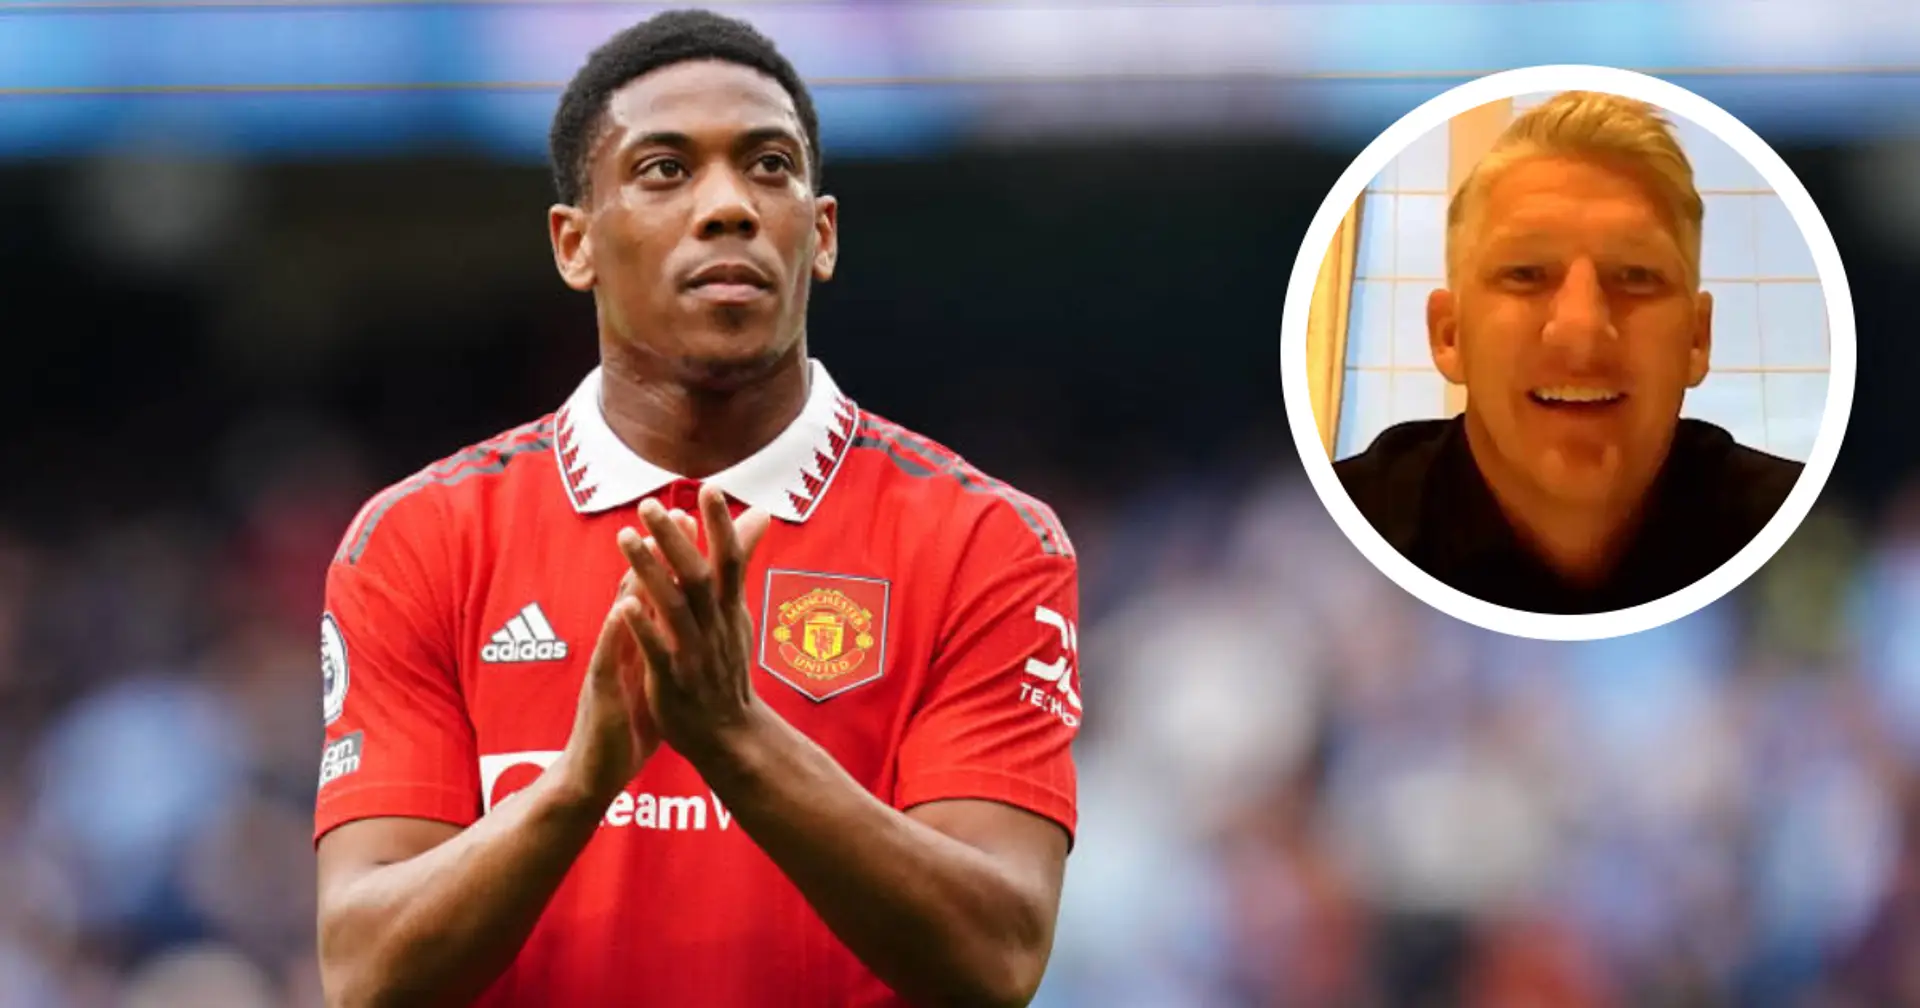 'You need to give him confidence': Schweinsteiger backs Martial to be 'one of best players'